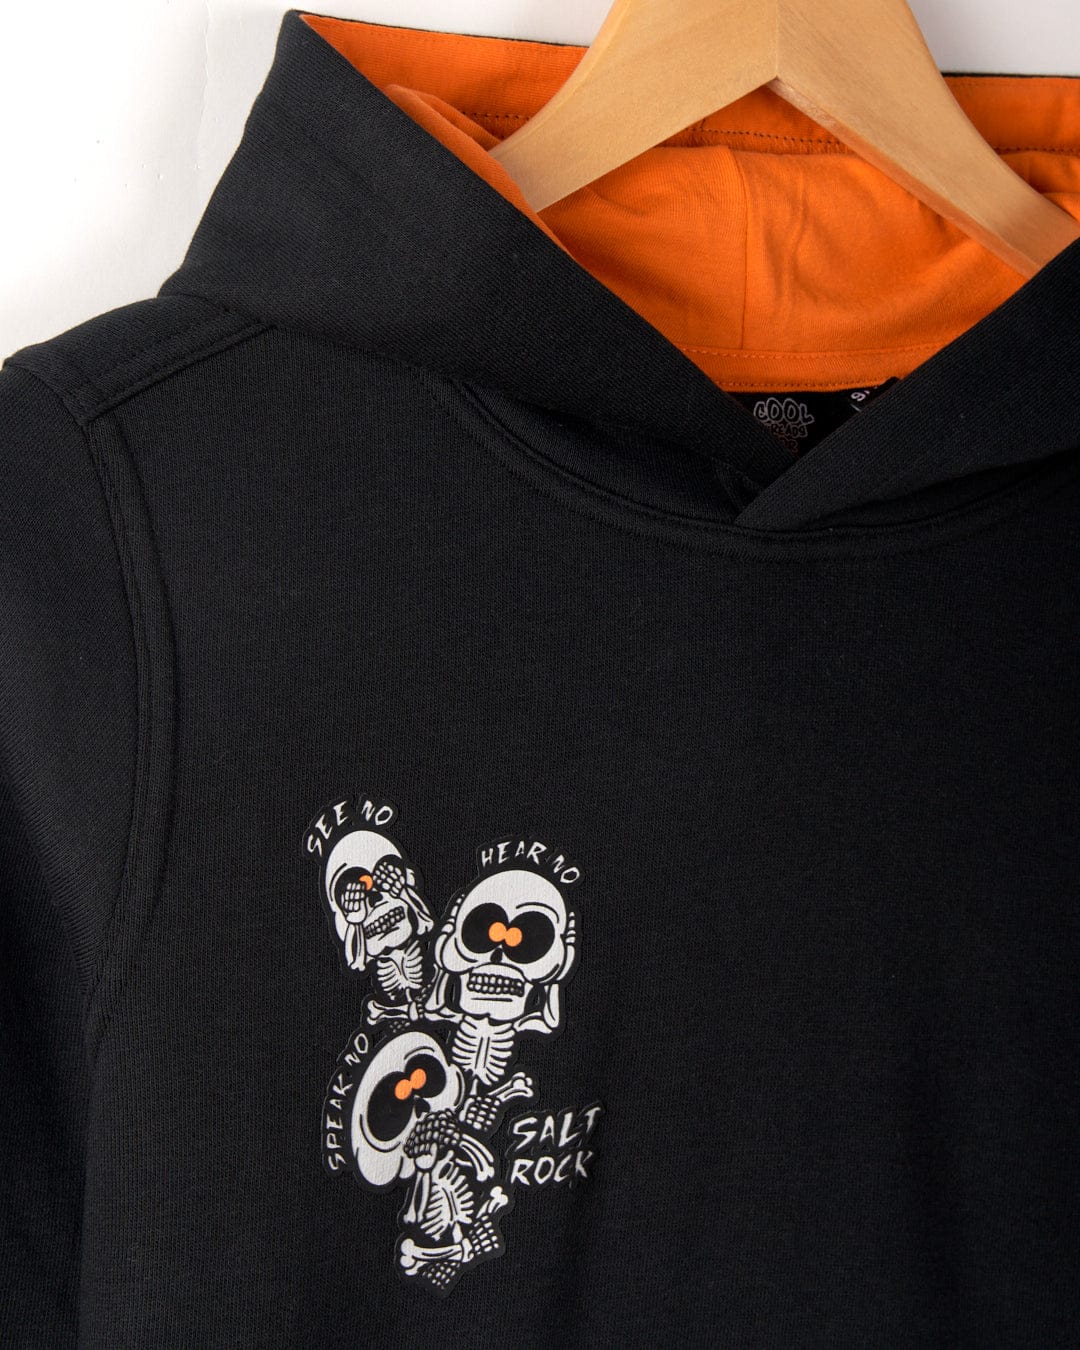 Black hoodie with a "See no evil, hear no evil, speak no evil" design featuring three skeletons. The inside of the hood is orange. The word "Saltrock" is printed at the bottom of the design. Features a convenient kangaroo pocket for easy storage.
Product Name: See No Skulls - Kids Recycled Pop Hoodie - Black
Brand Name: Saltrock